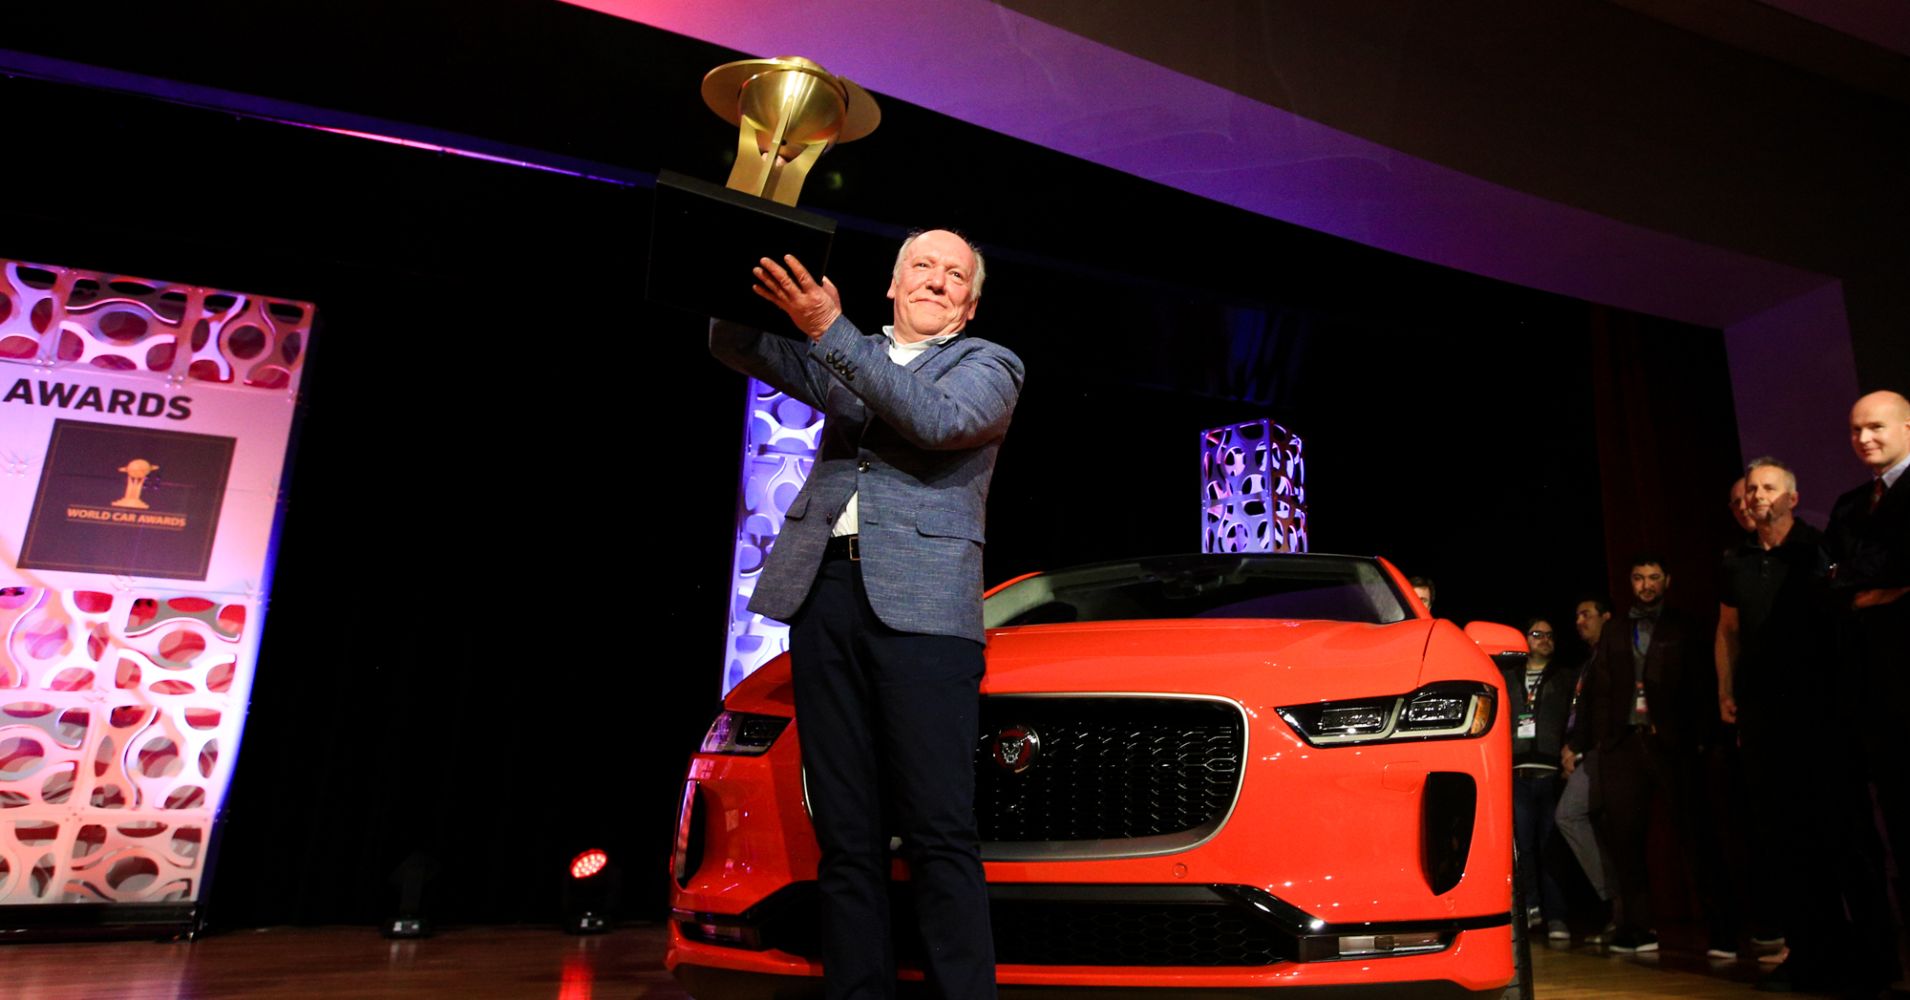 Ian Callum and the Jaguar I-Pace accept the award for the 2019 World Car Award at the New York Auto Show in New York on April 17th, 2019.